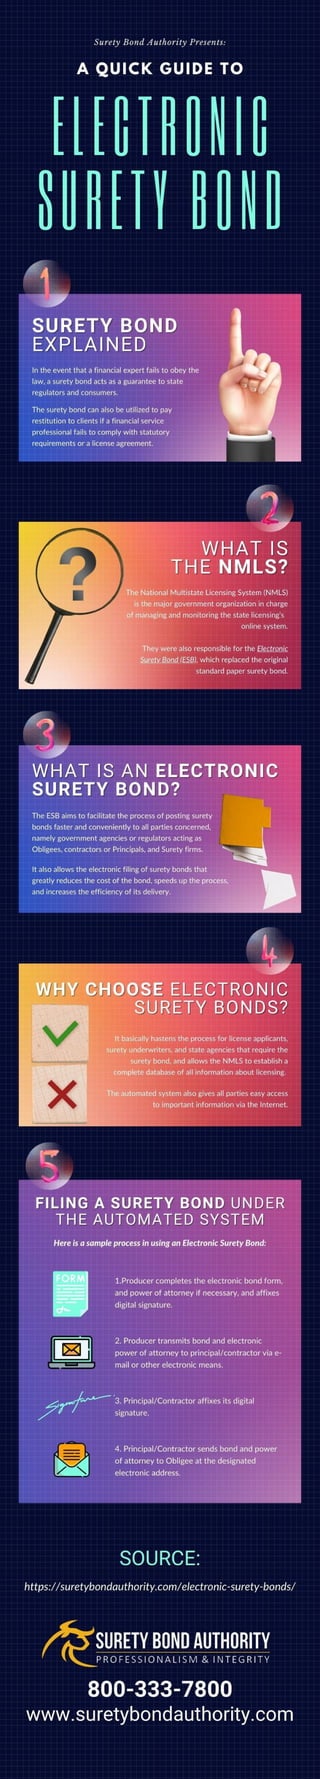 What are Electronic Surety Bonds?